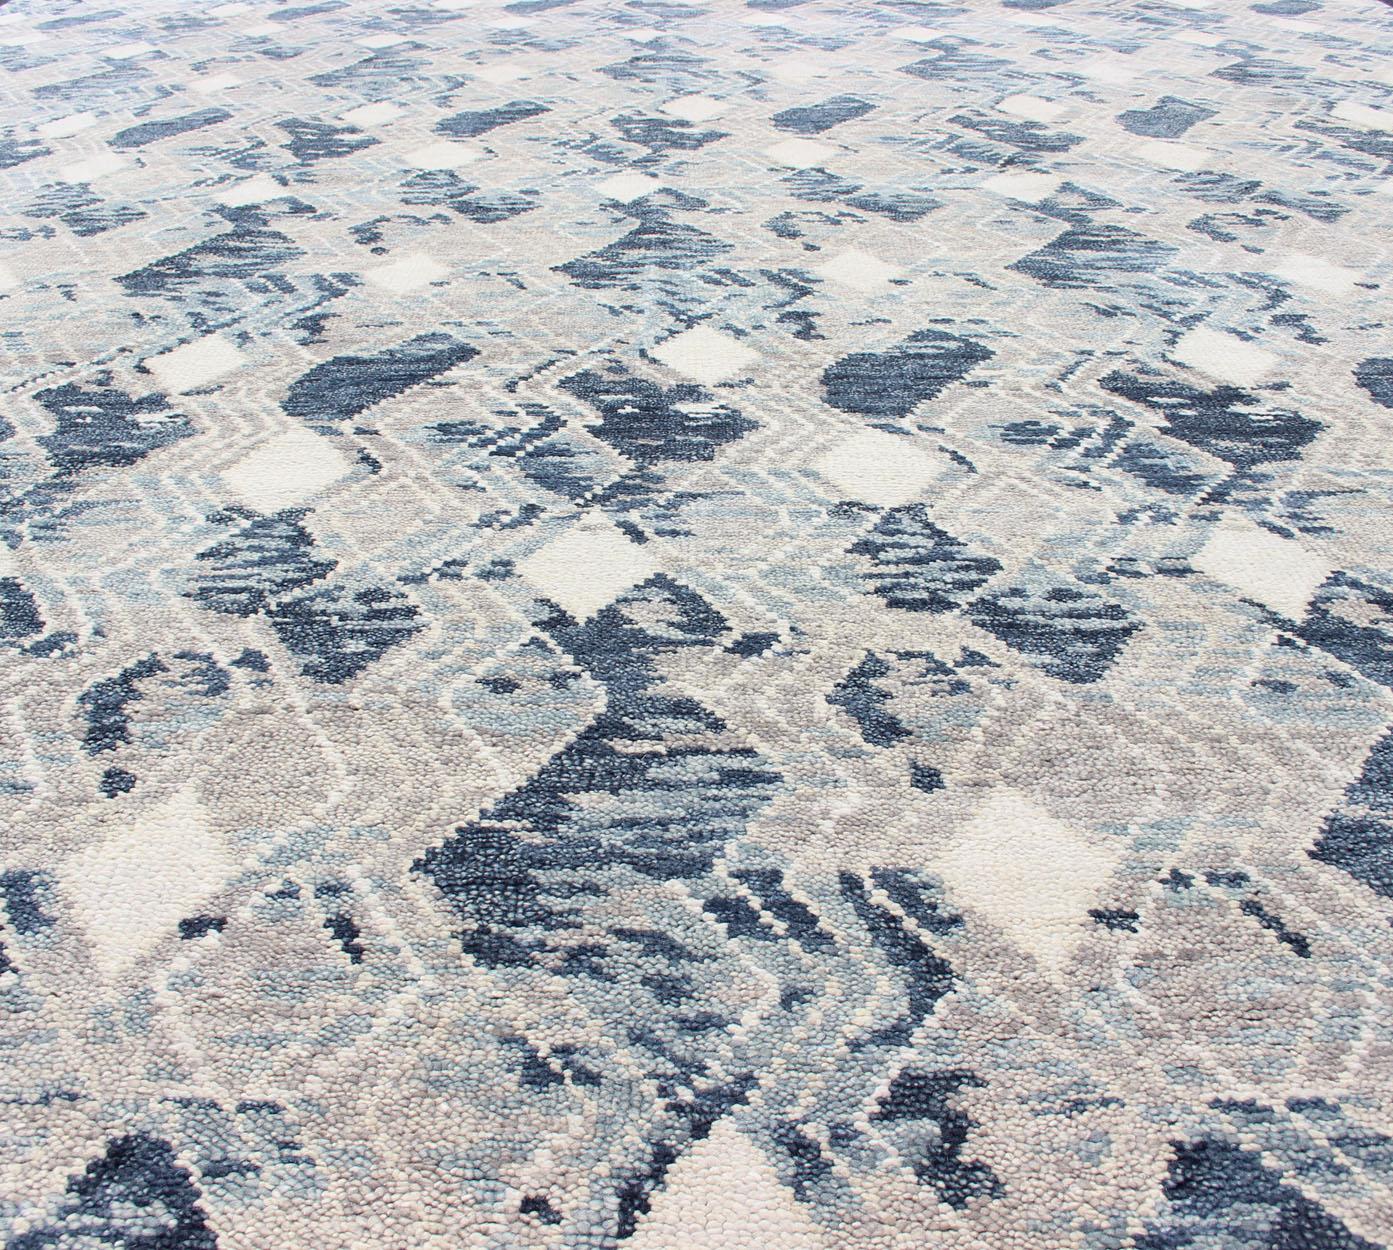 Oversized Modern Diamond Designed Indian Area Rug in Blue, Gray, and White. Country of Origin: India; Type: Modern; Design: All-Over, Abstract, Sub-Geometric, Diamond; Keivan Woven Arts: rug BDH-759039-RT-18.
Measures: 12'1 x 14'11 
This beautiful